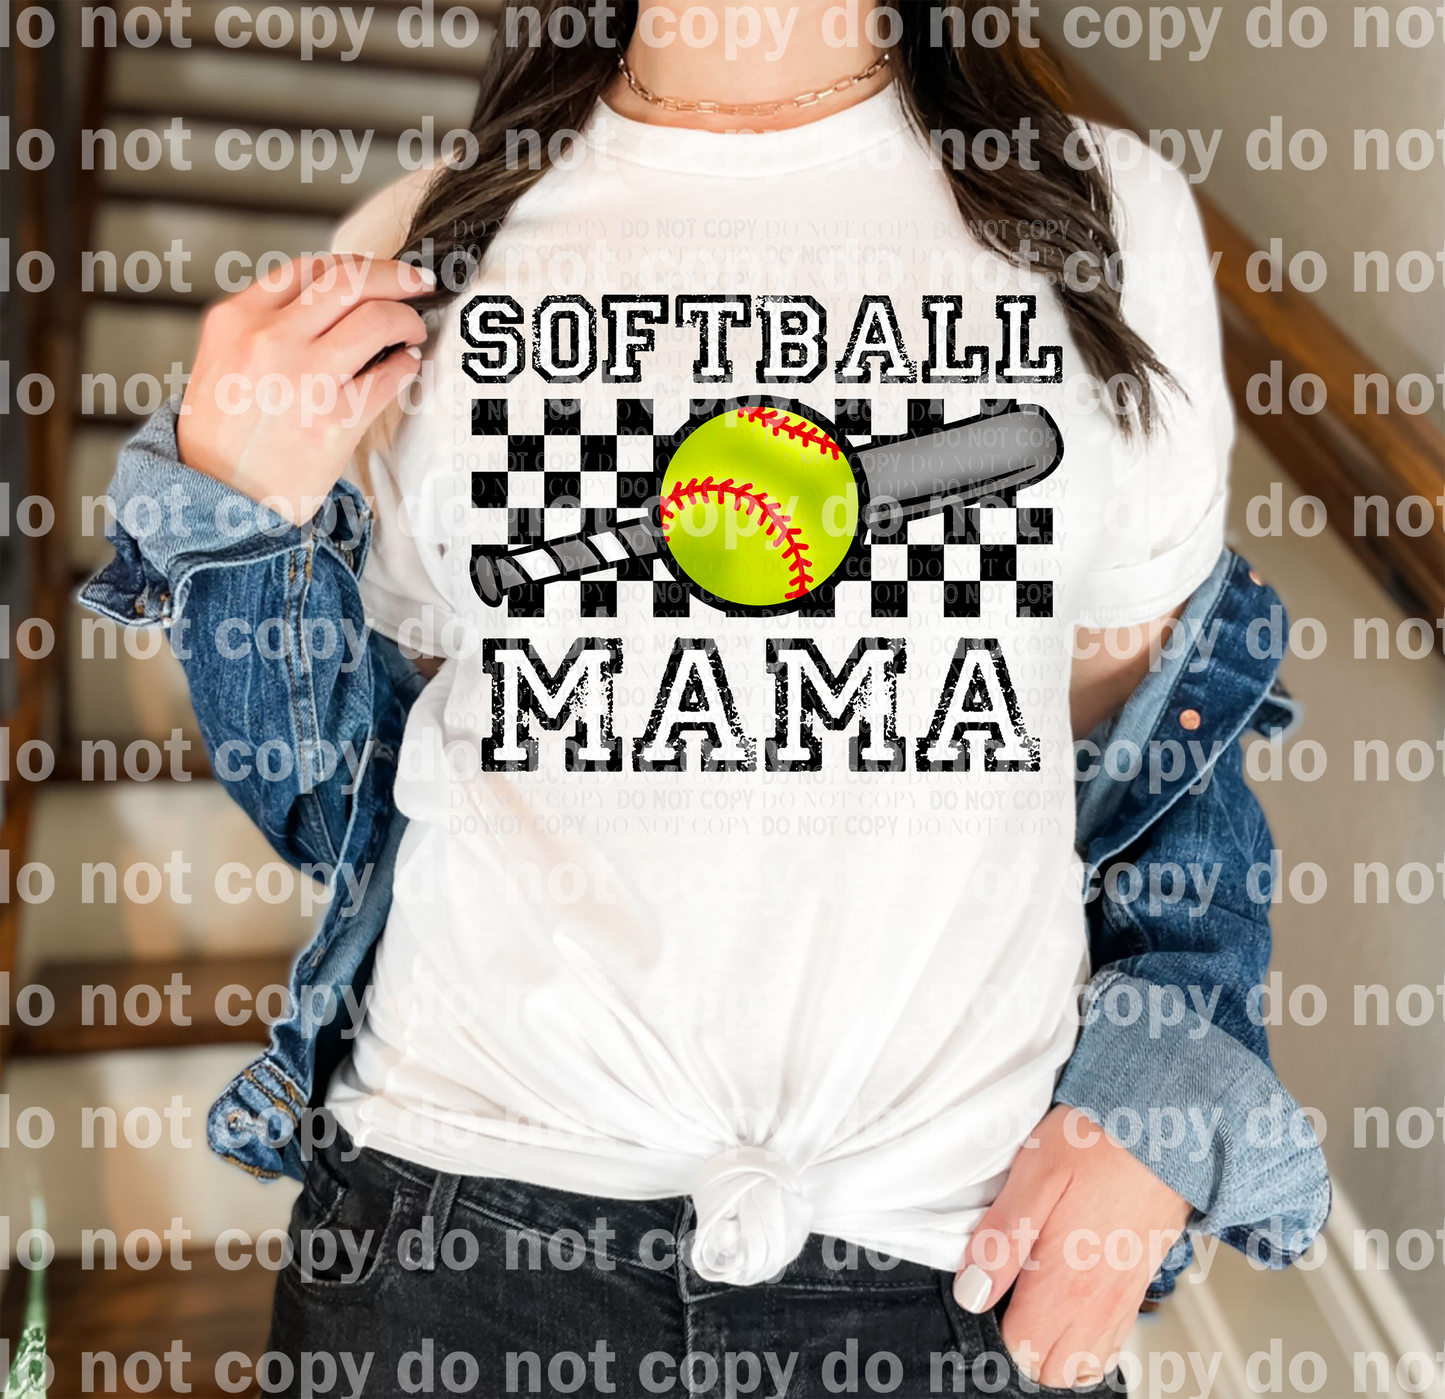 Softball Mama Full Color/One Color Dream Print or Sublimation Print